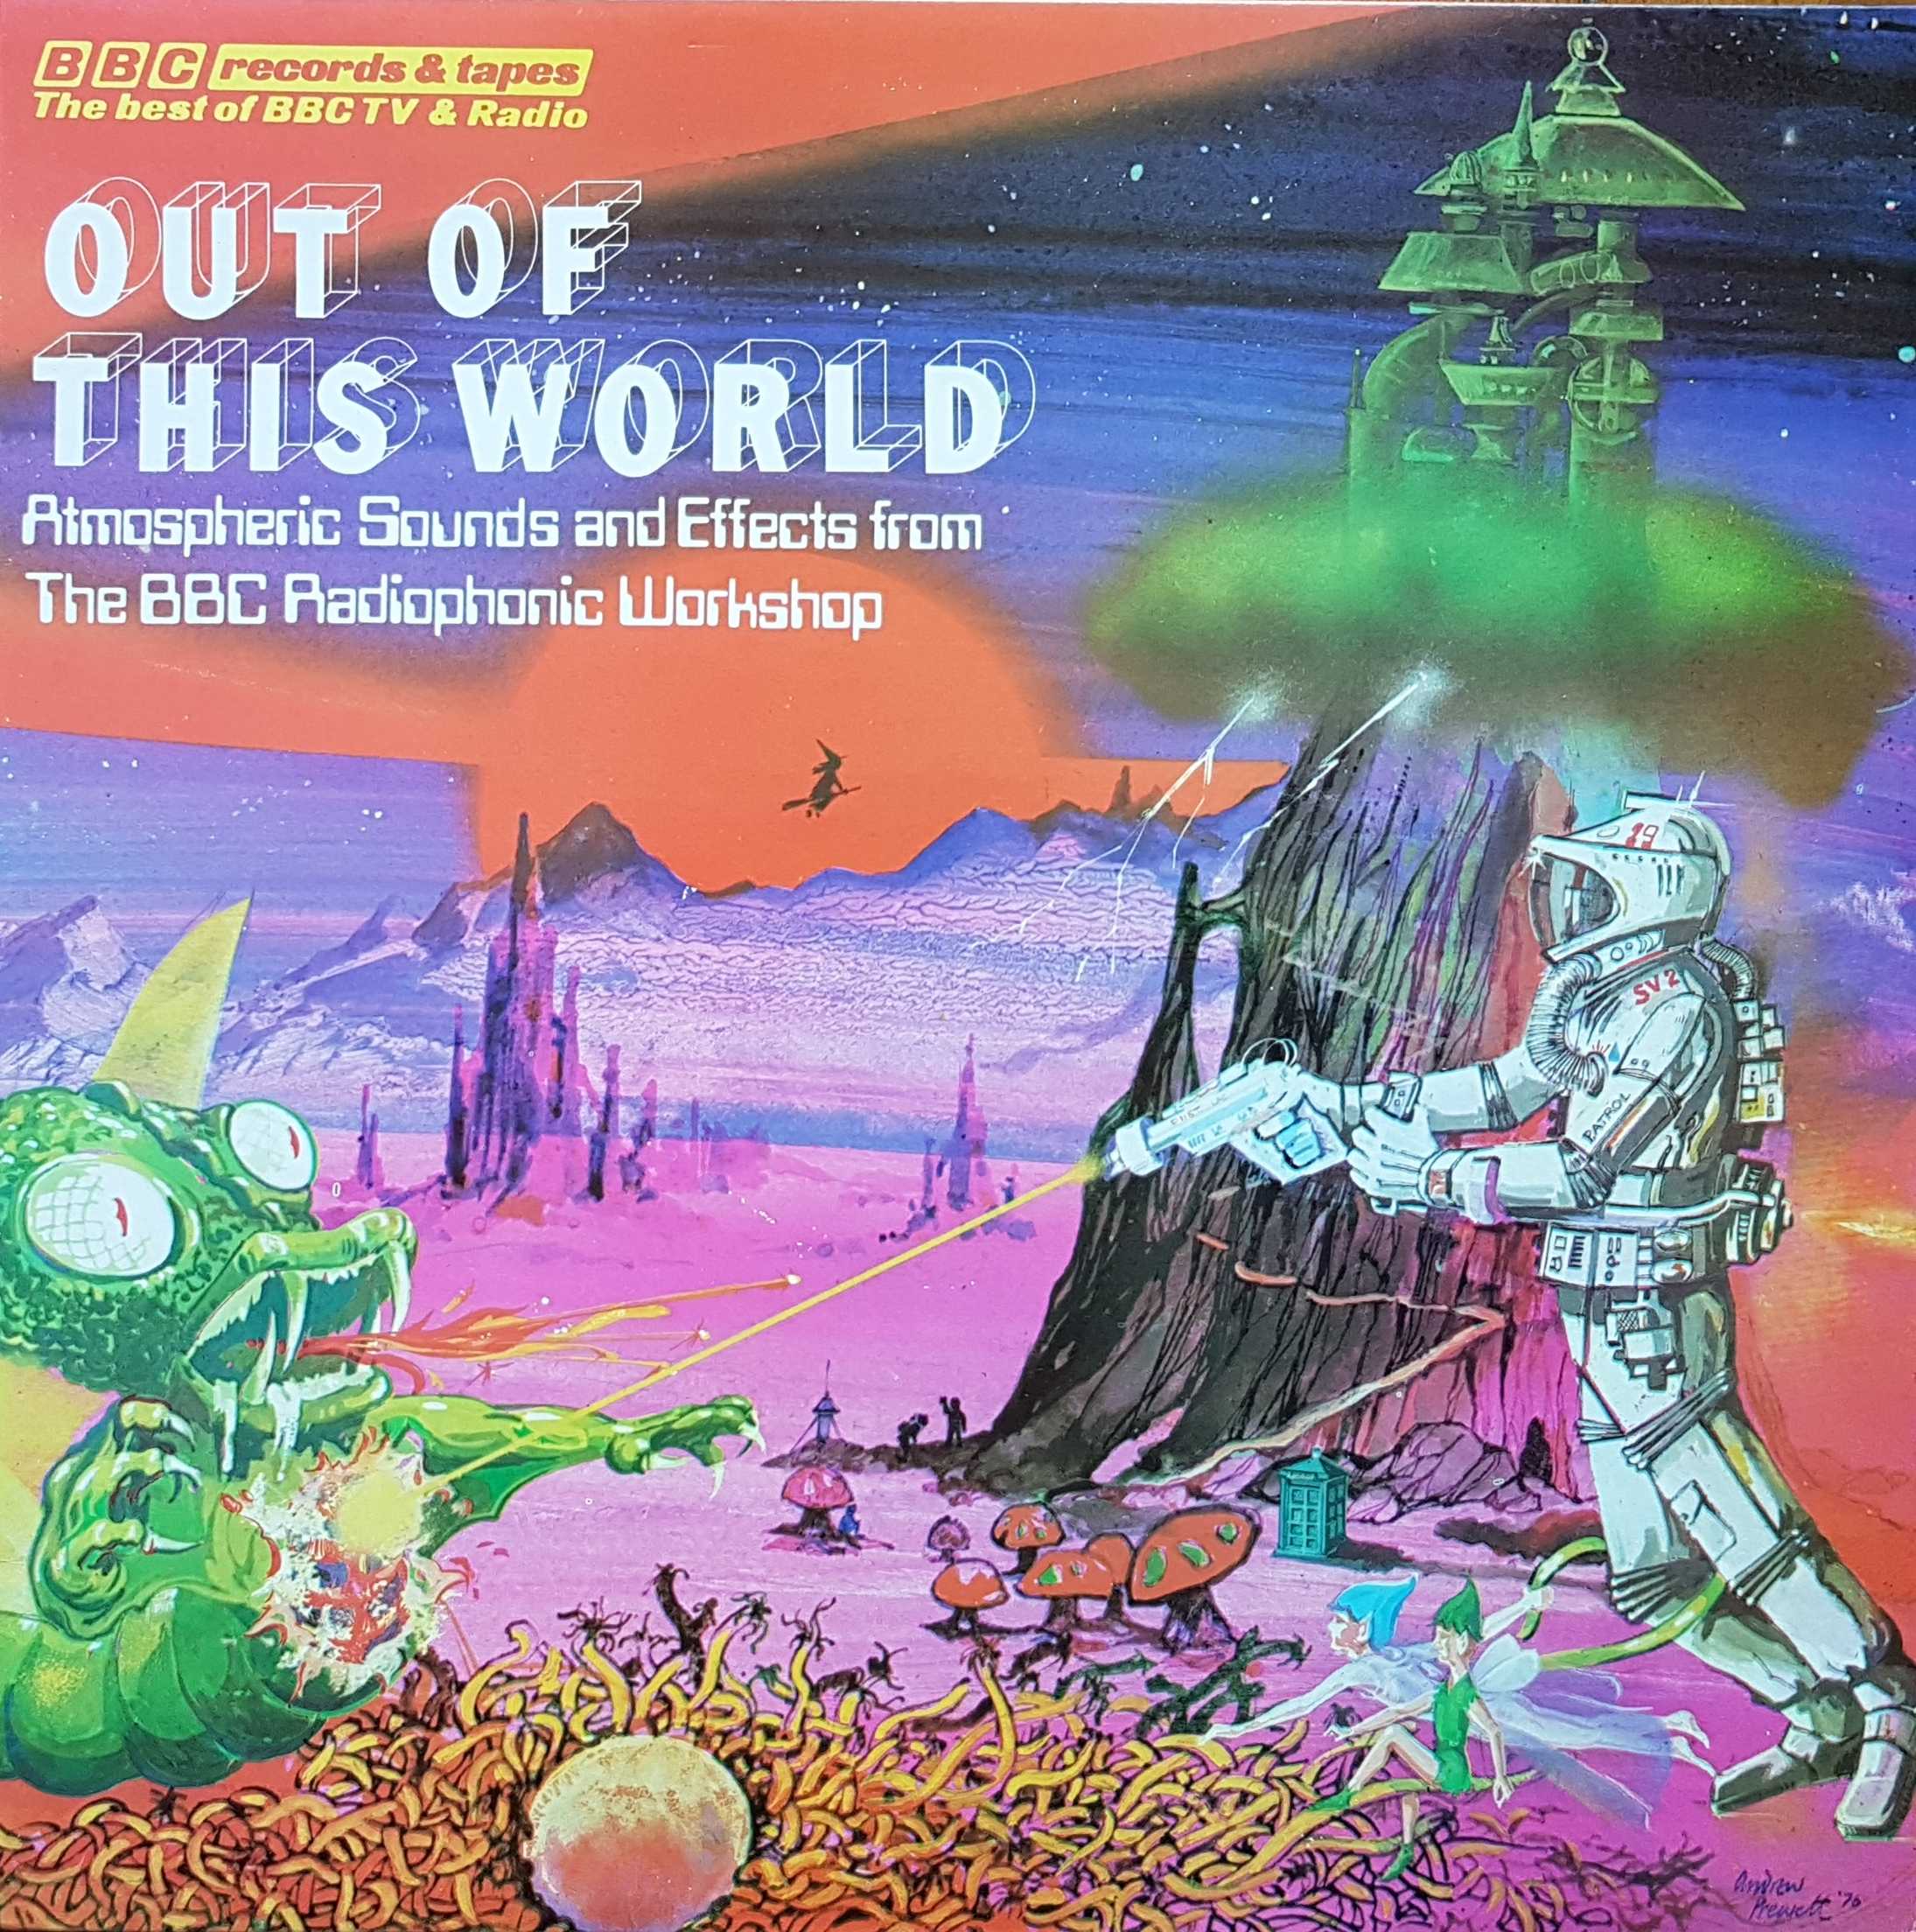 Picture of REC 225 Out of this World (Sound effects no. 11) by artist Various from the BBC albums - Records and Tapes library